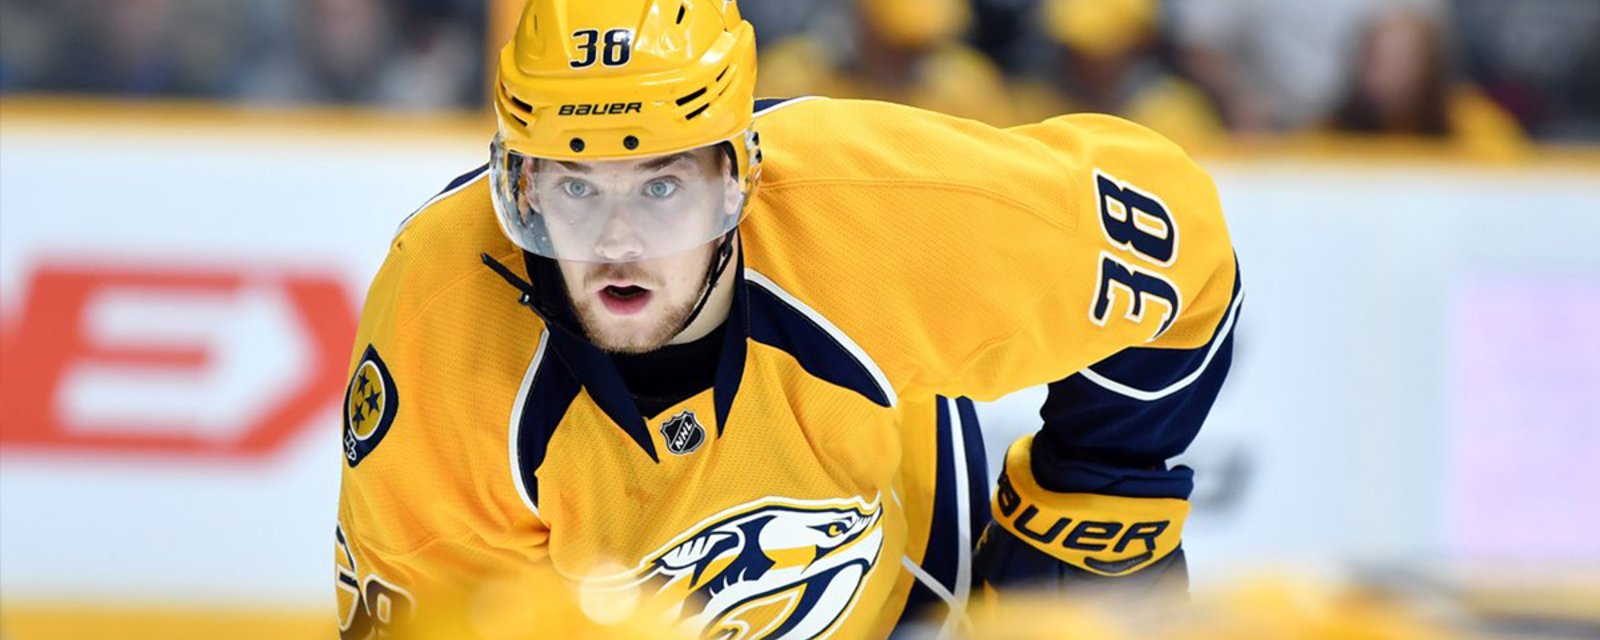 Breaking: The worst is confirmed for Preds and Arvidsson